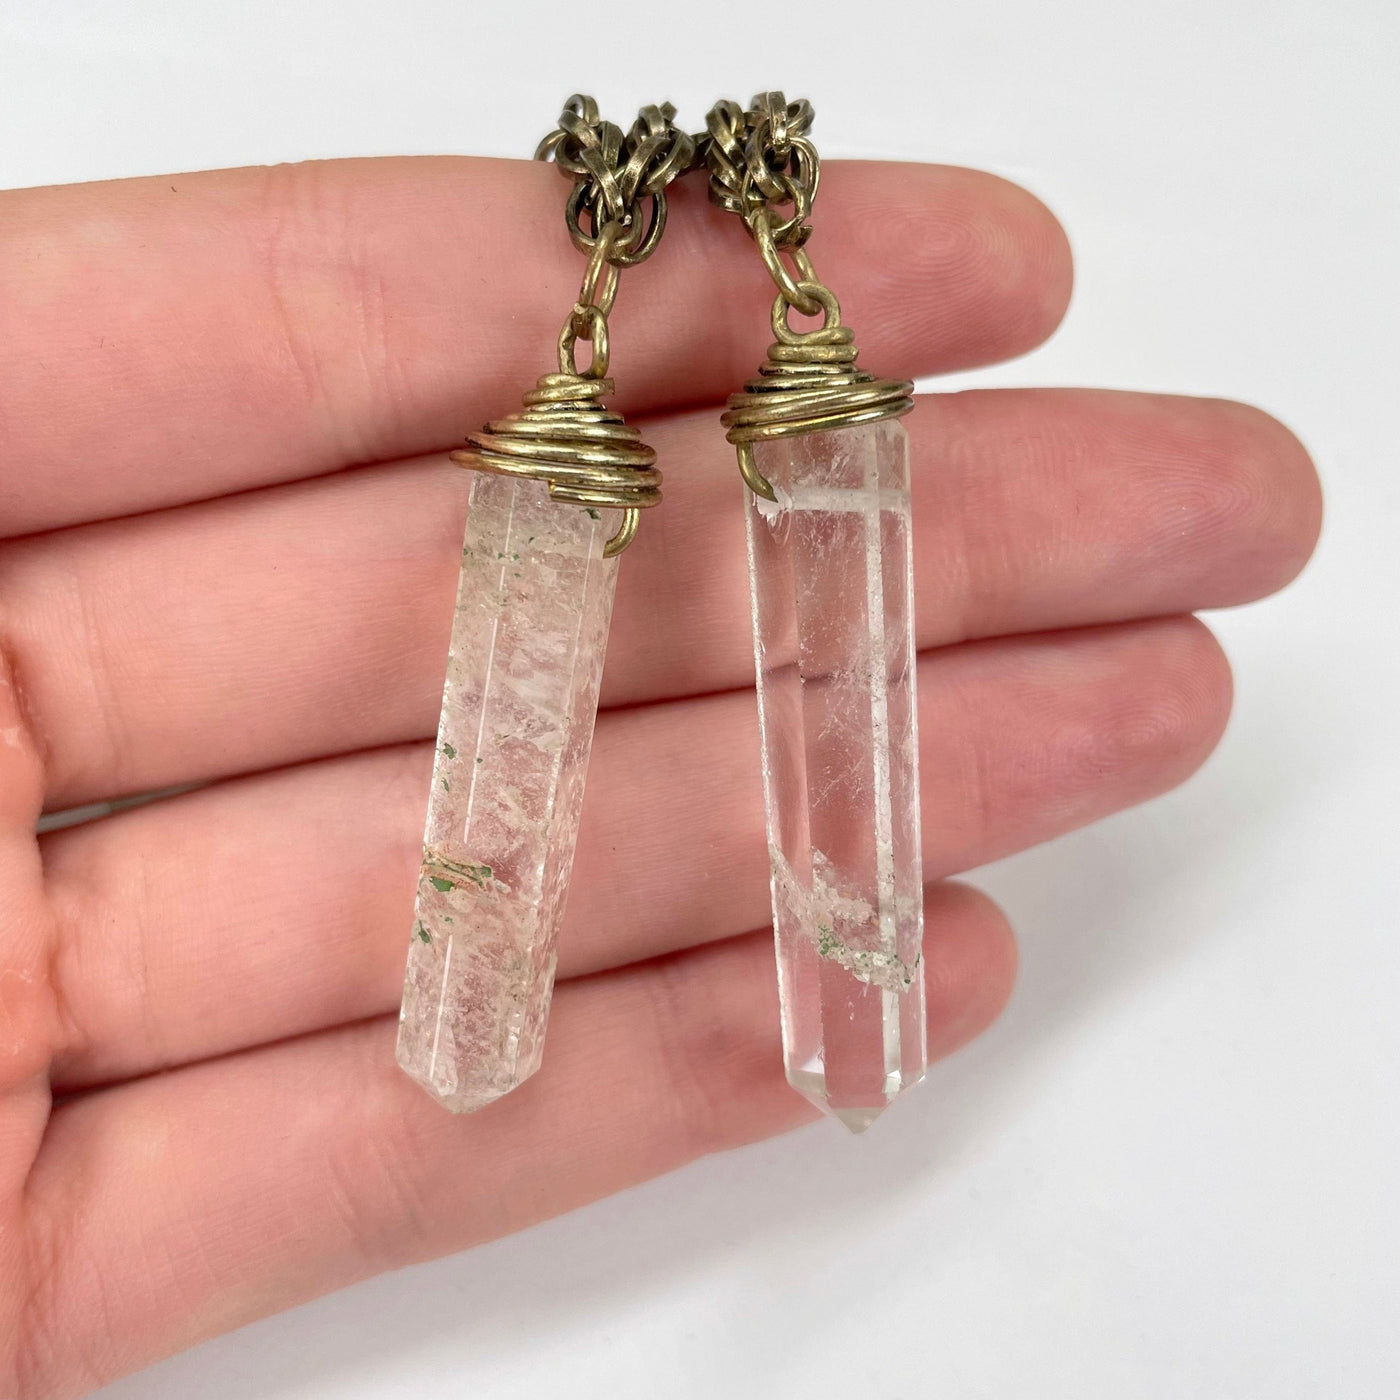 outer crystal quartz pendants in hand for size reference